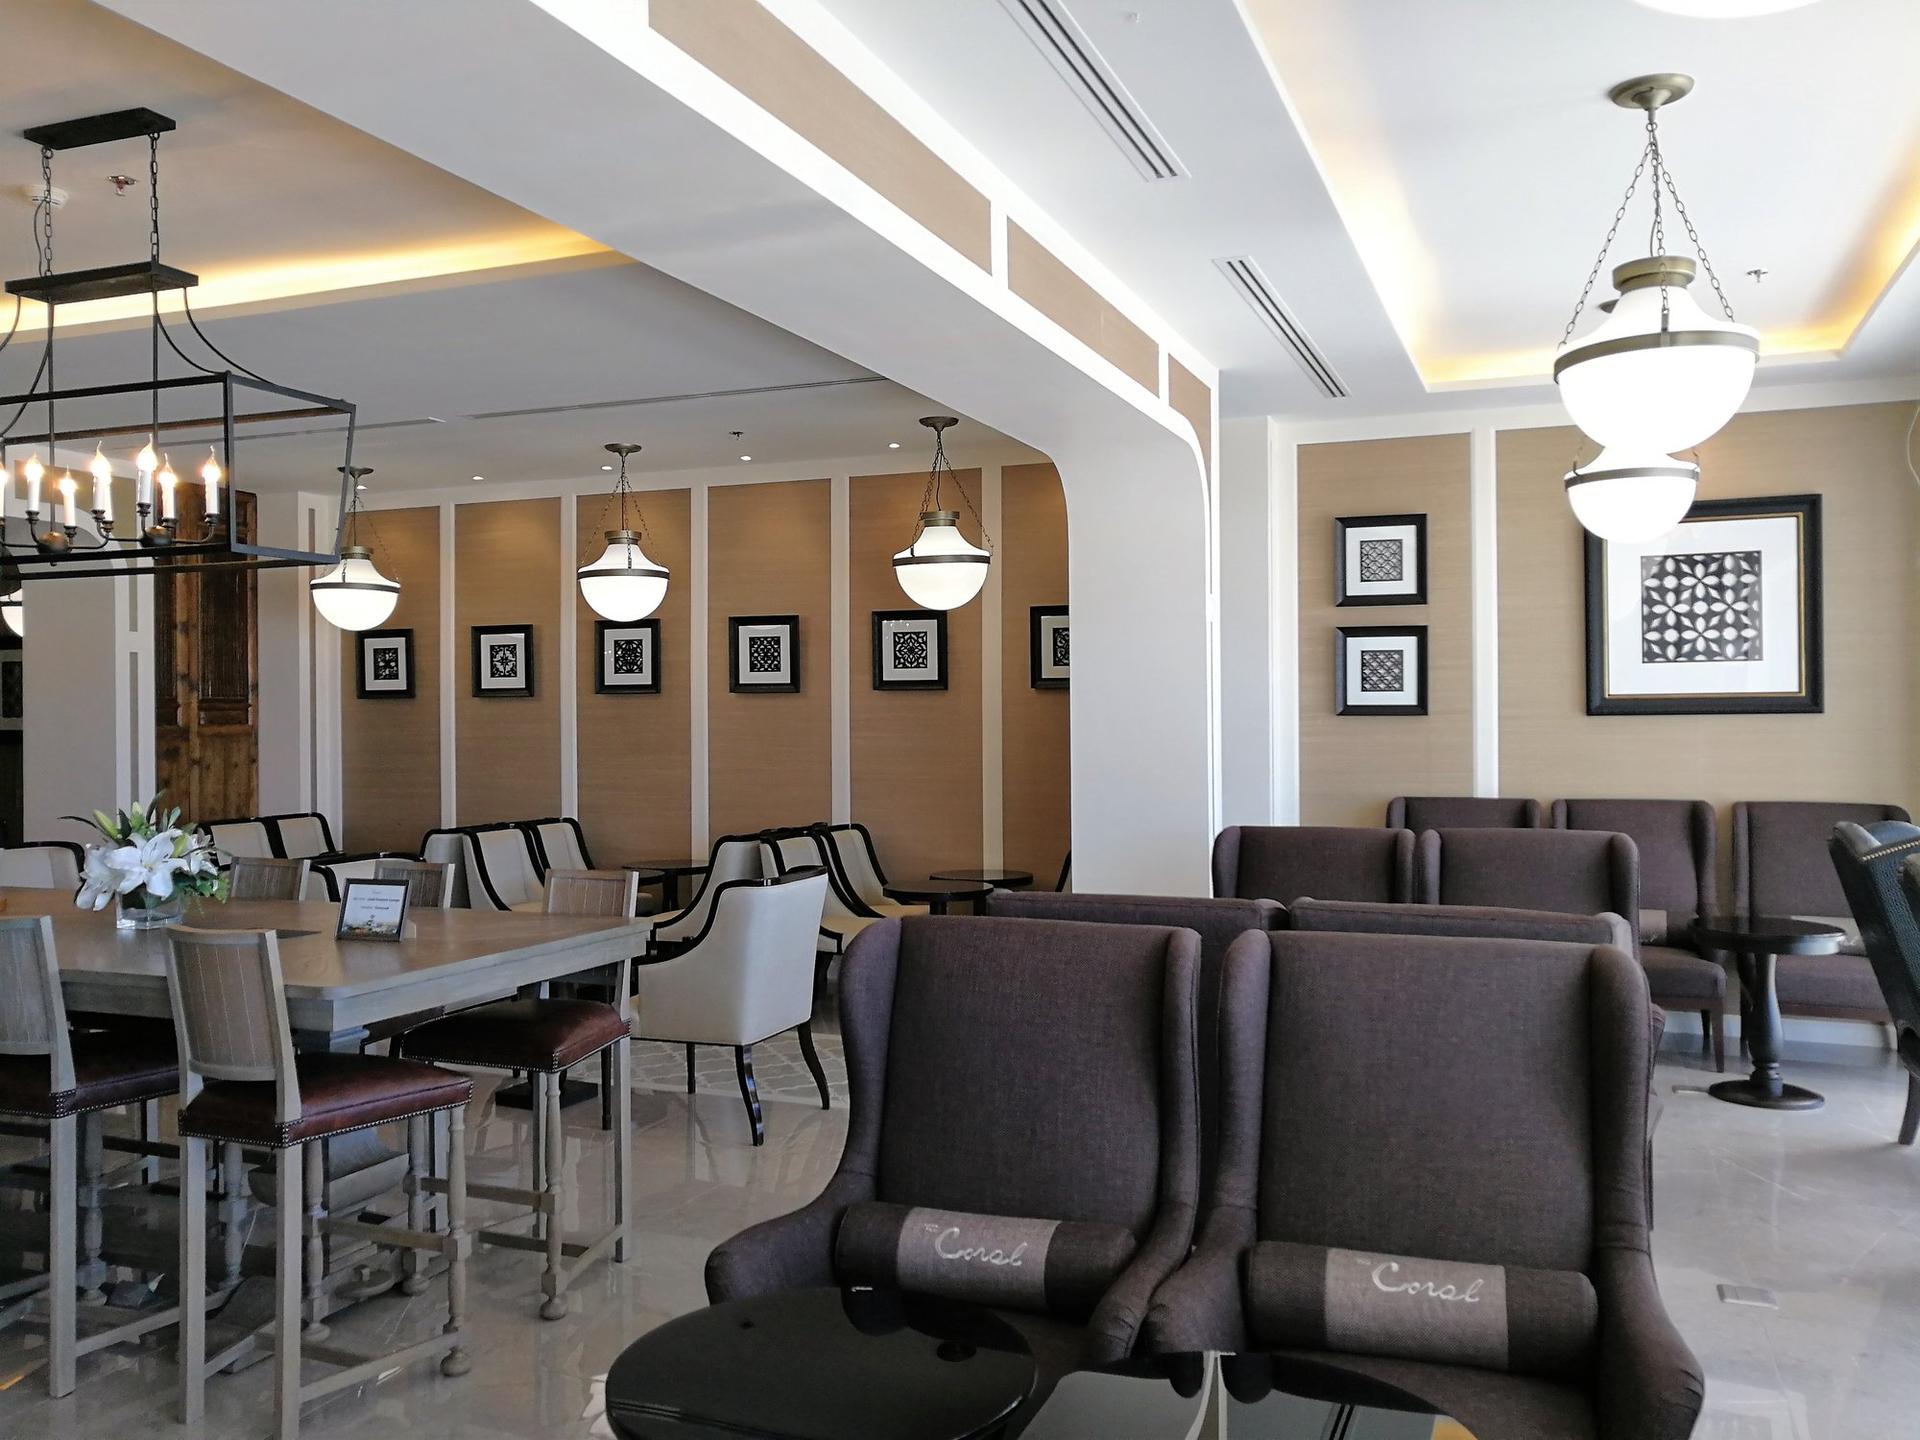 The Coral Executive Lounge image 8 of 22